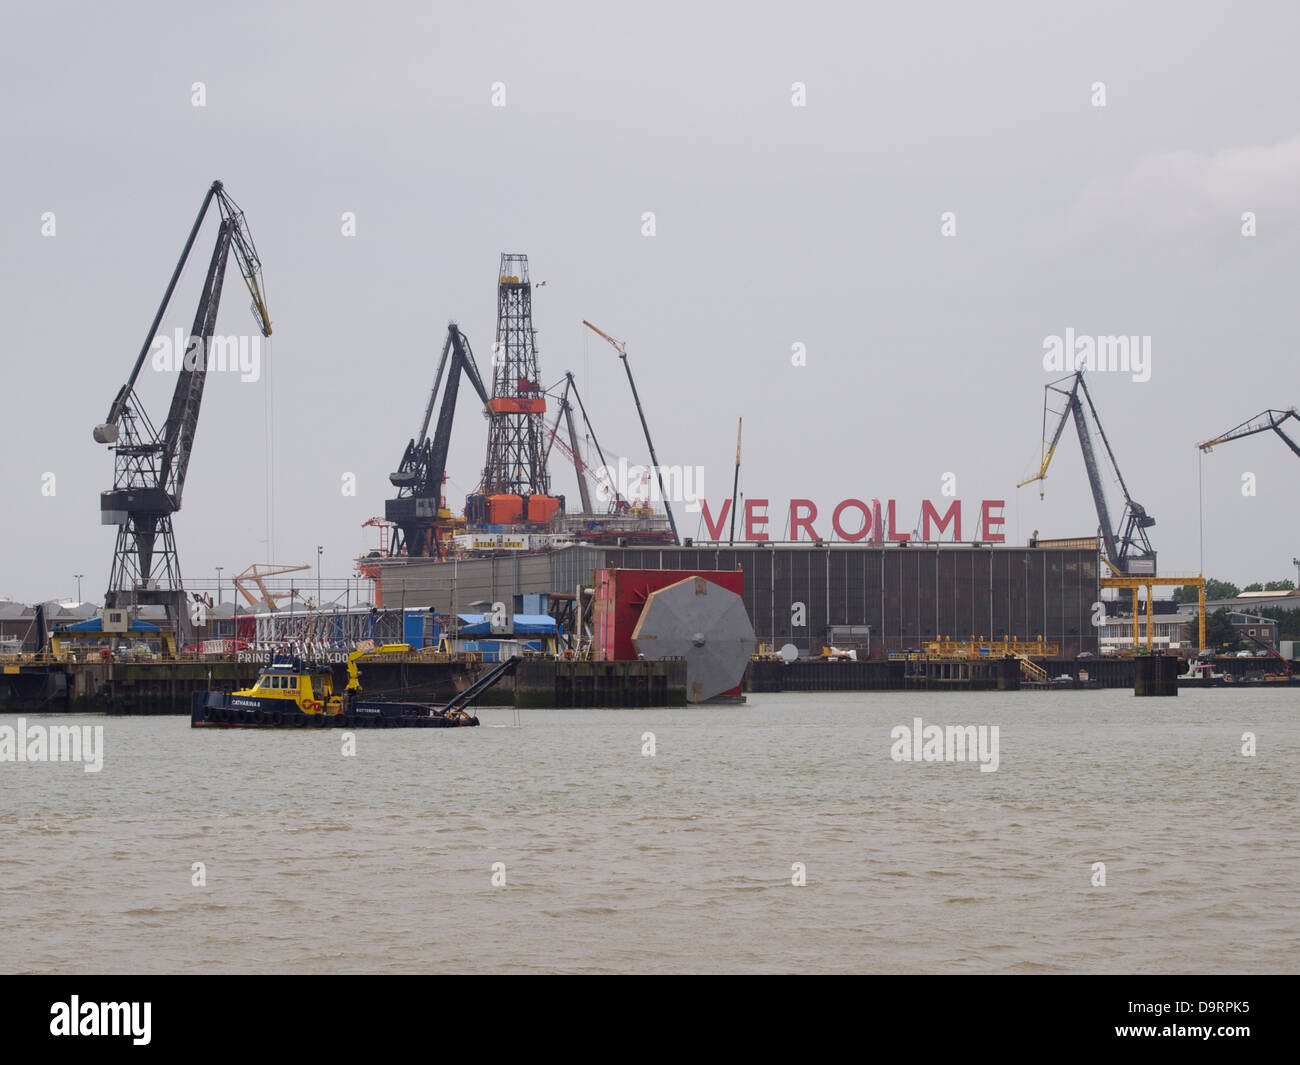 Verolme shipyard in the port of Rotterdam, the Netherlands, currently specializing in maintenance of offshore constructions Stock Photo